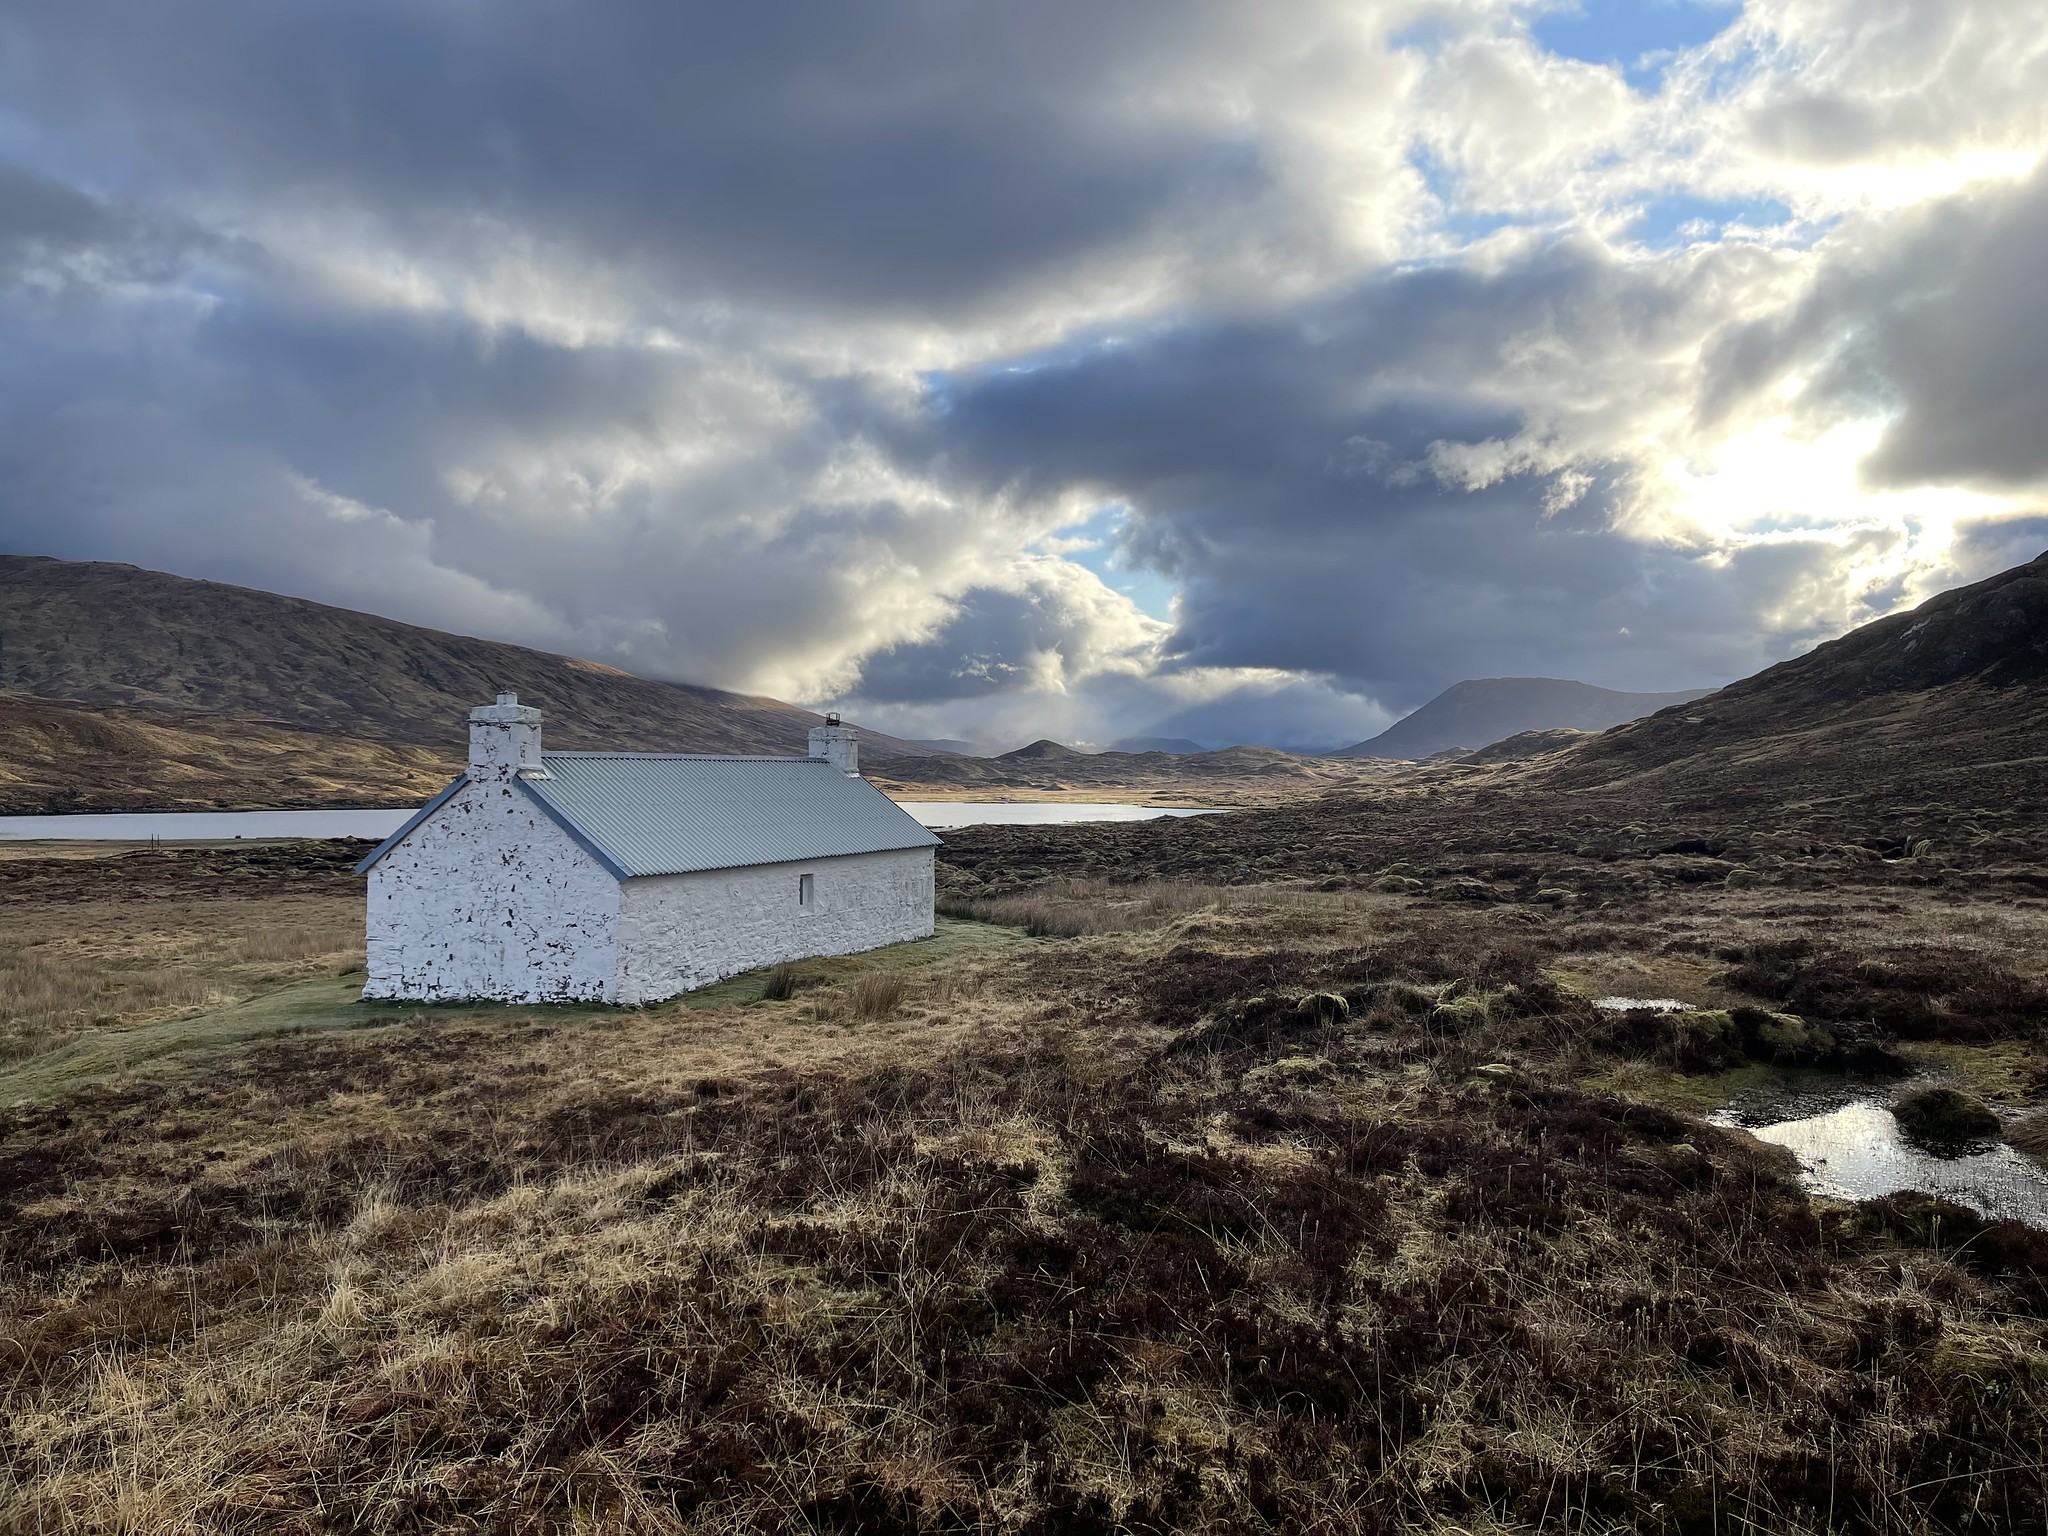 White washed, stone bothy near a river or lake one some land covered in brown grass and gorse, with Scottish mountains in the far distance.